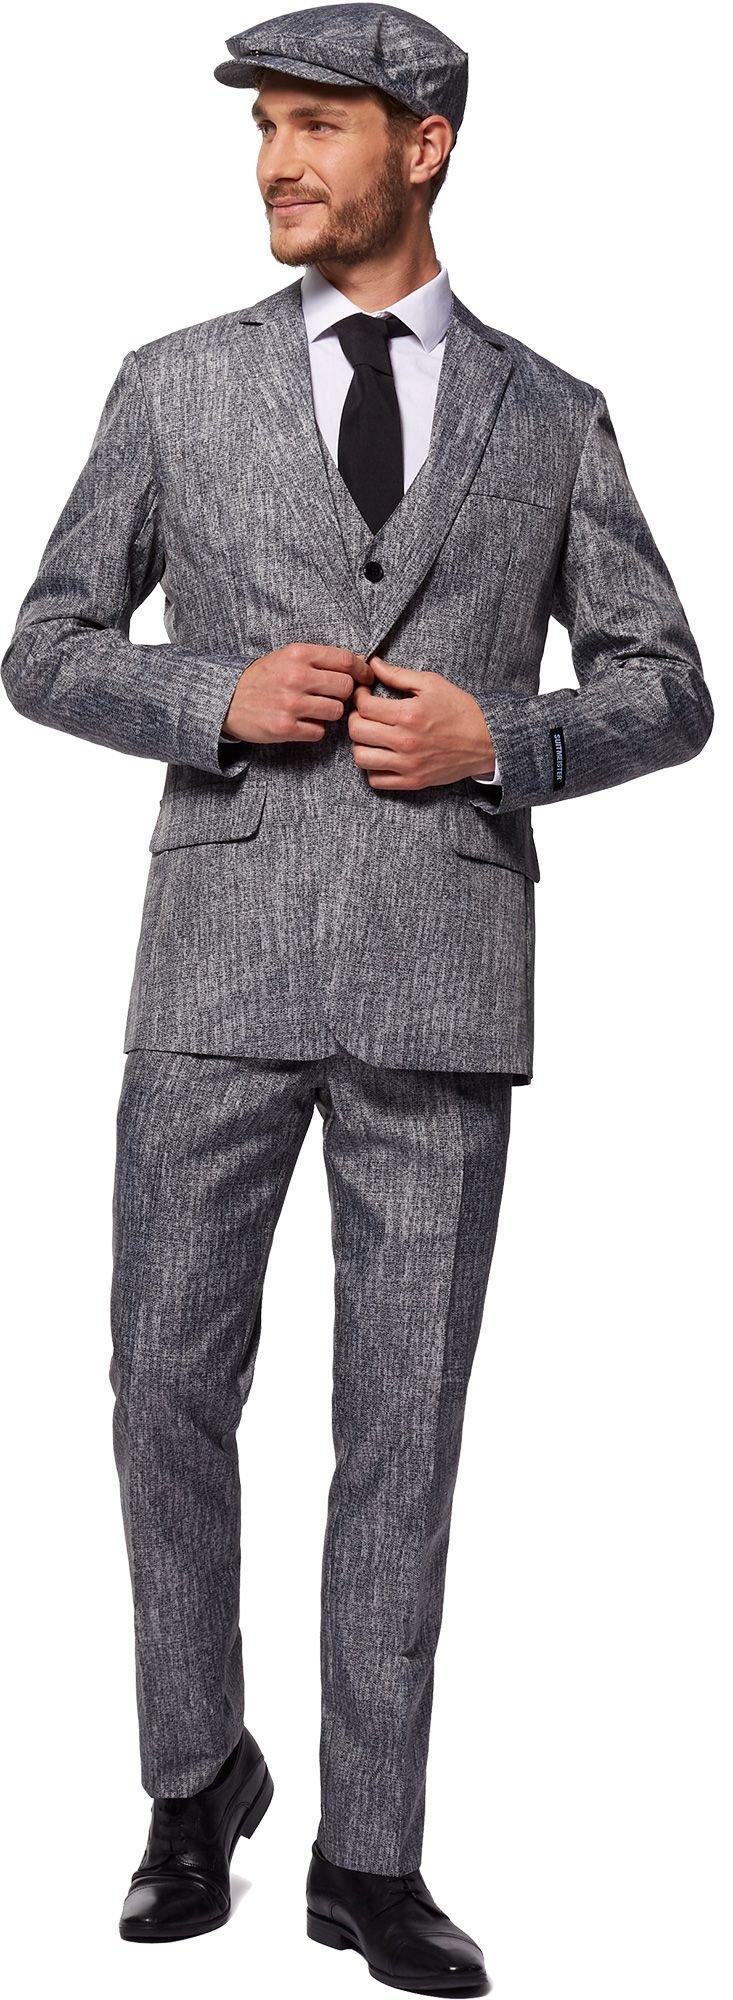 Gray 20s Gangster Costume for Adults | Party City